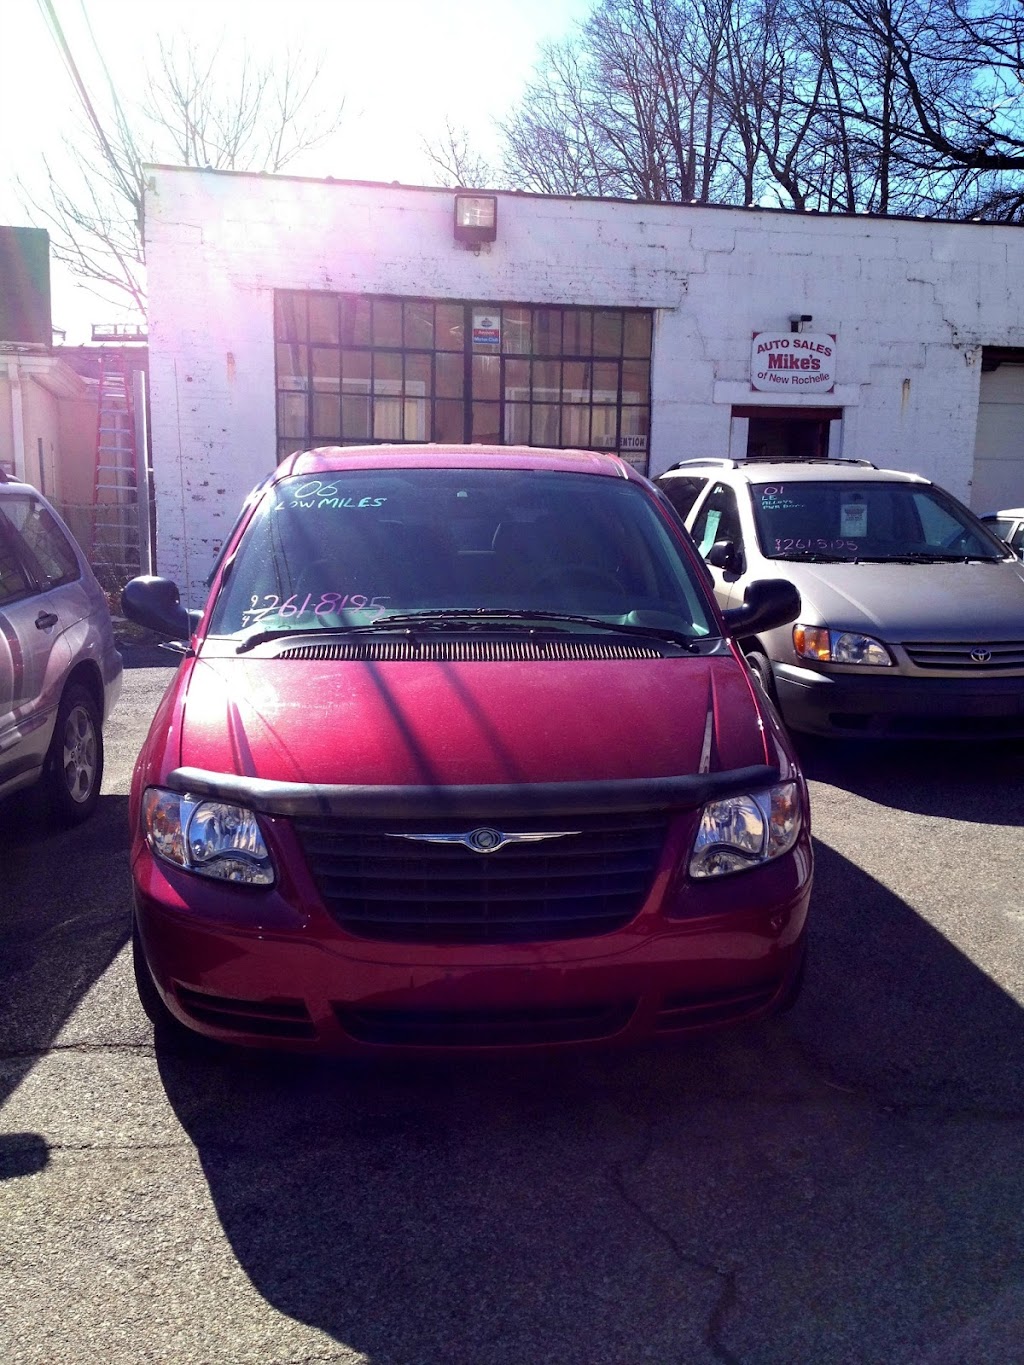 Mikes Auto Sales-New Rochelle | 92 Rockdale Ave, New Rochelle, NY 10801 | Phone: (914) 261-8195